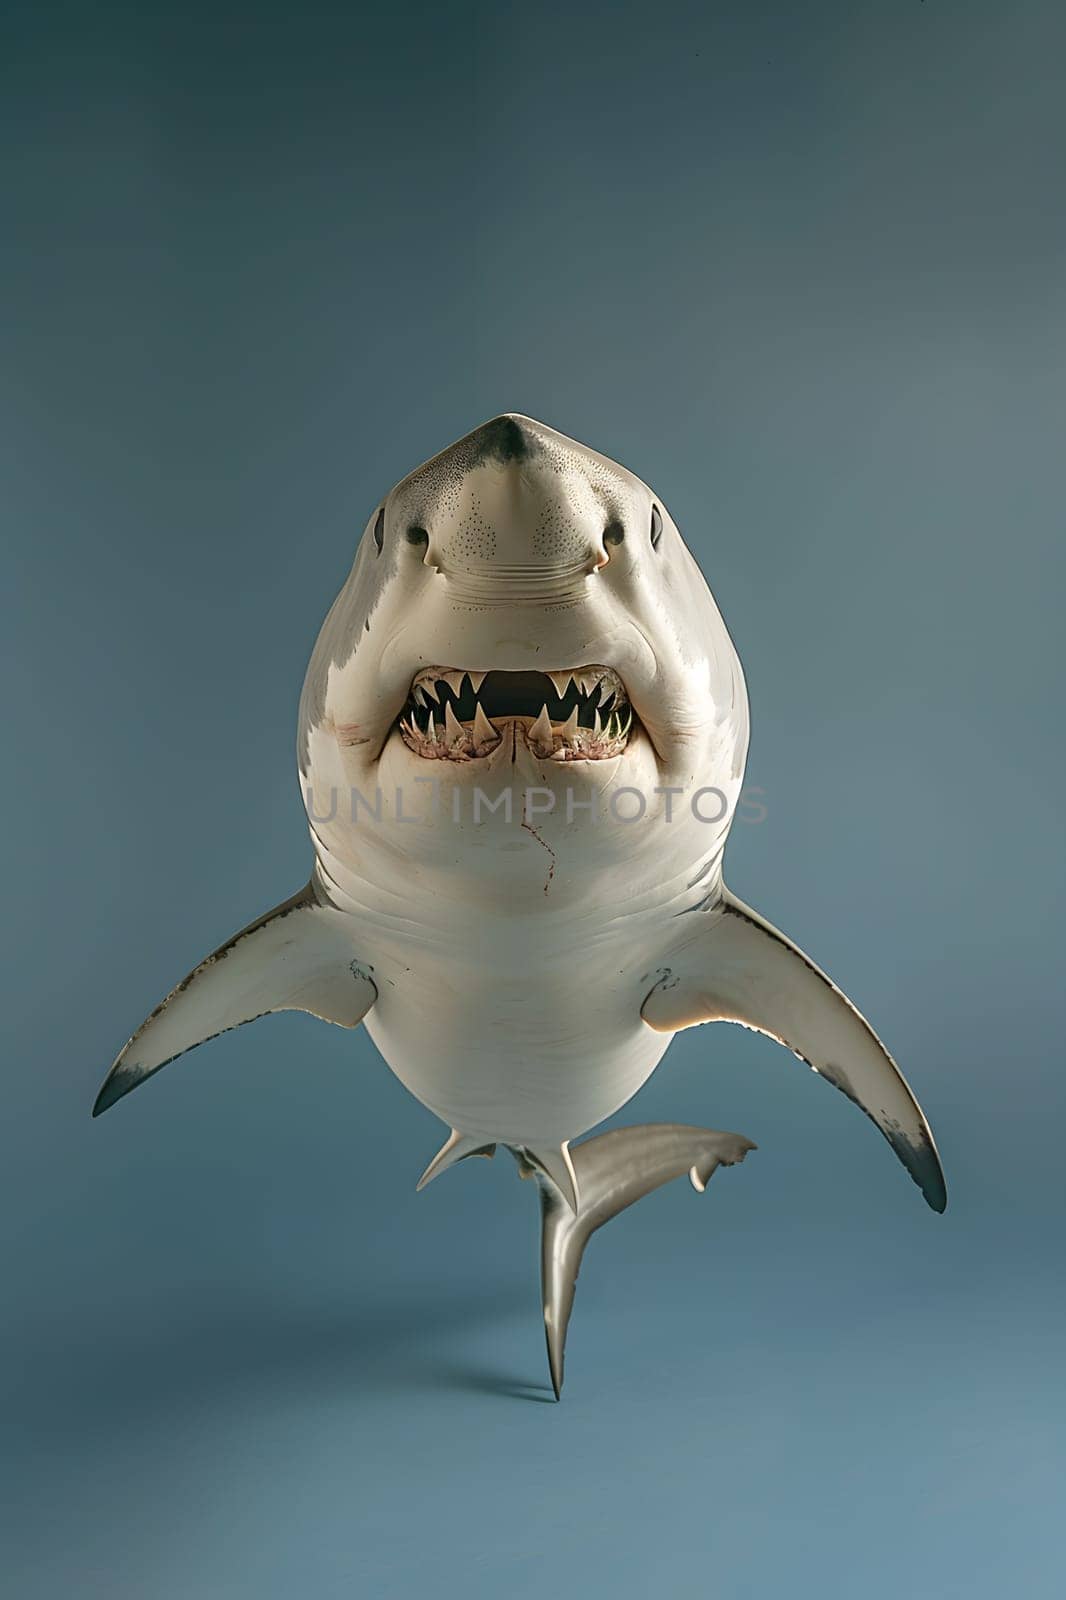 A Requiem shark from the Carcharhiniformes order, with its jaw open, is smiling at the camera under the water, showing its Lamniformes features like the fin